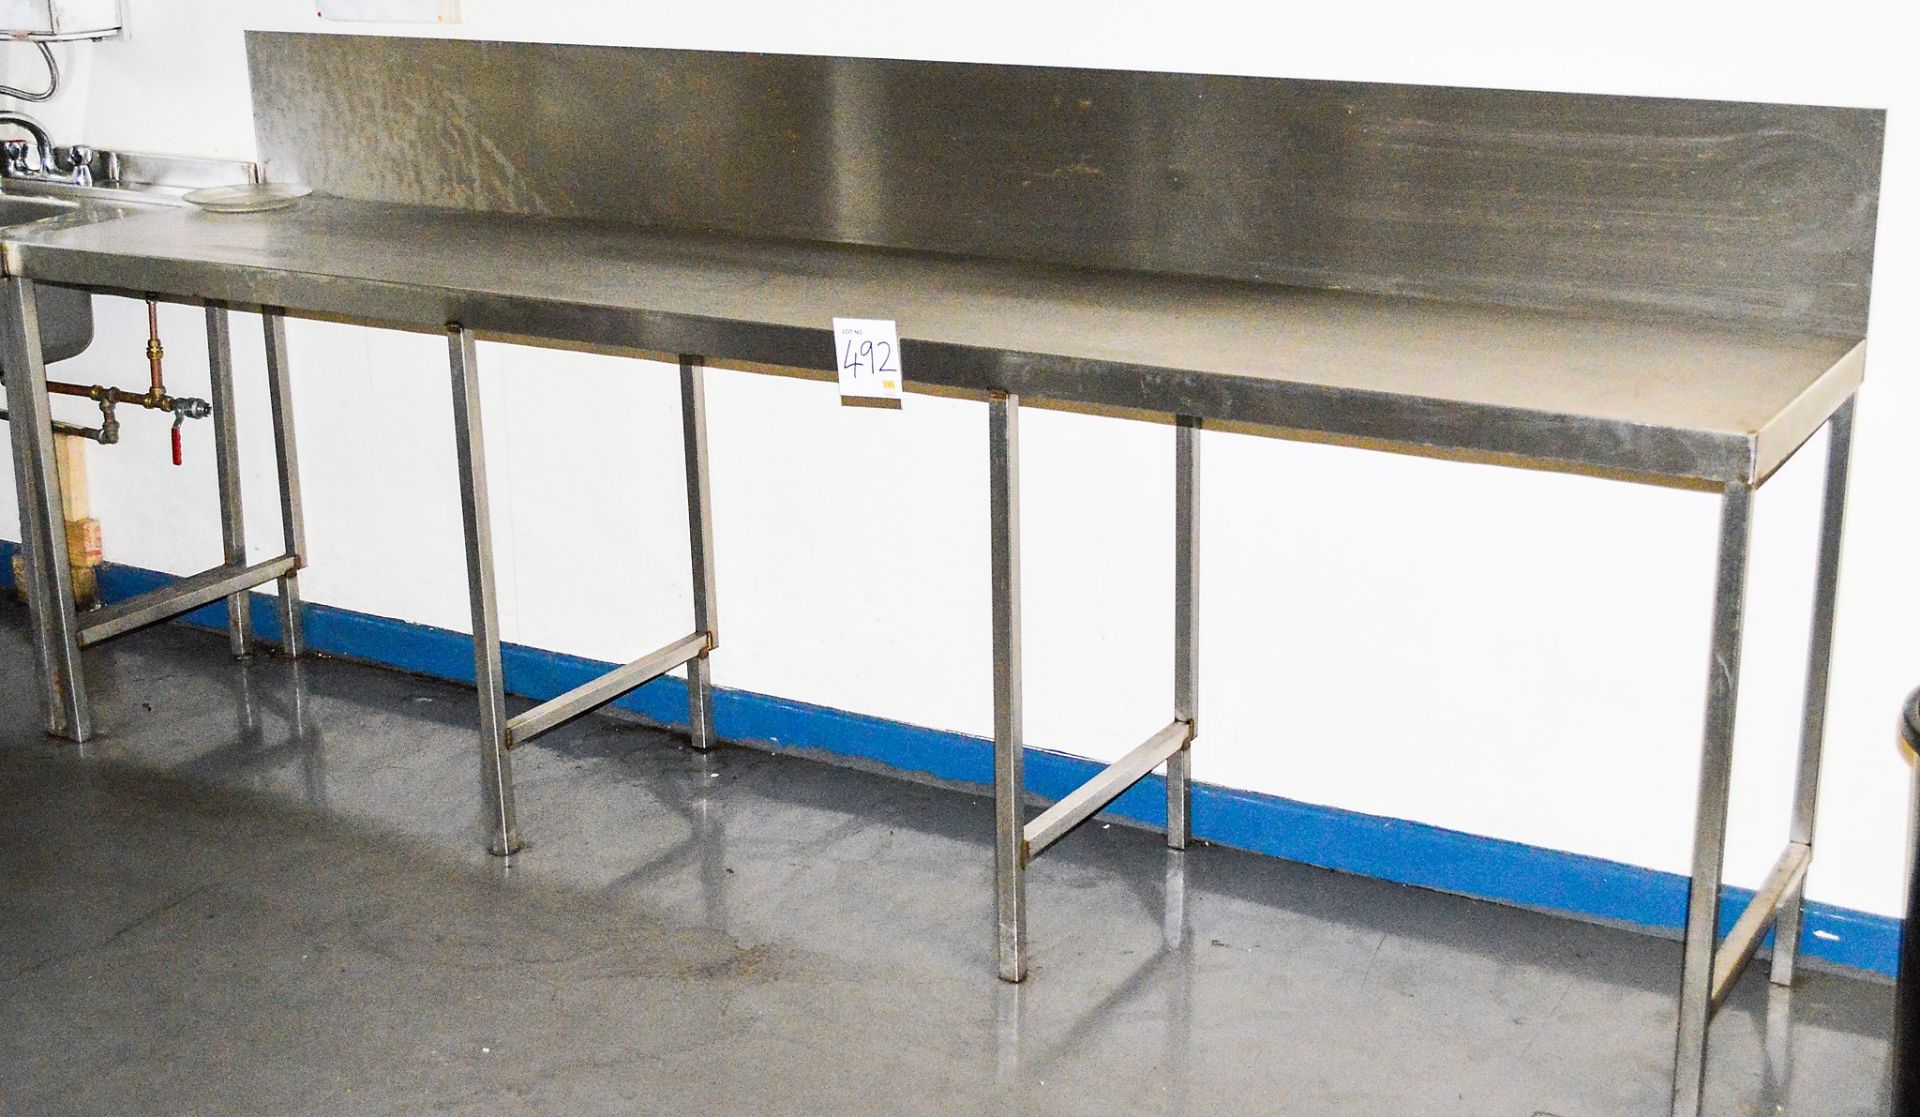 Stainless steel table